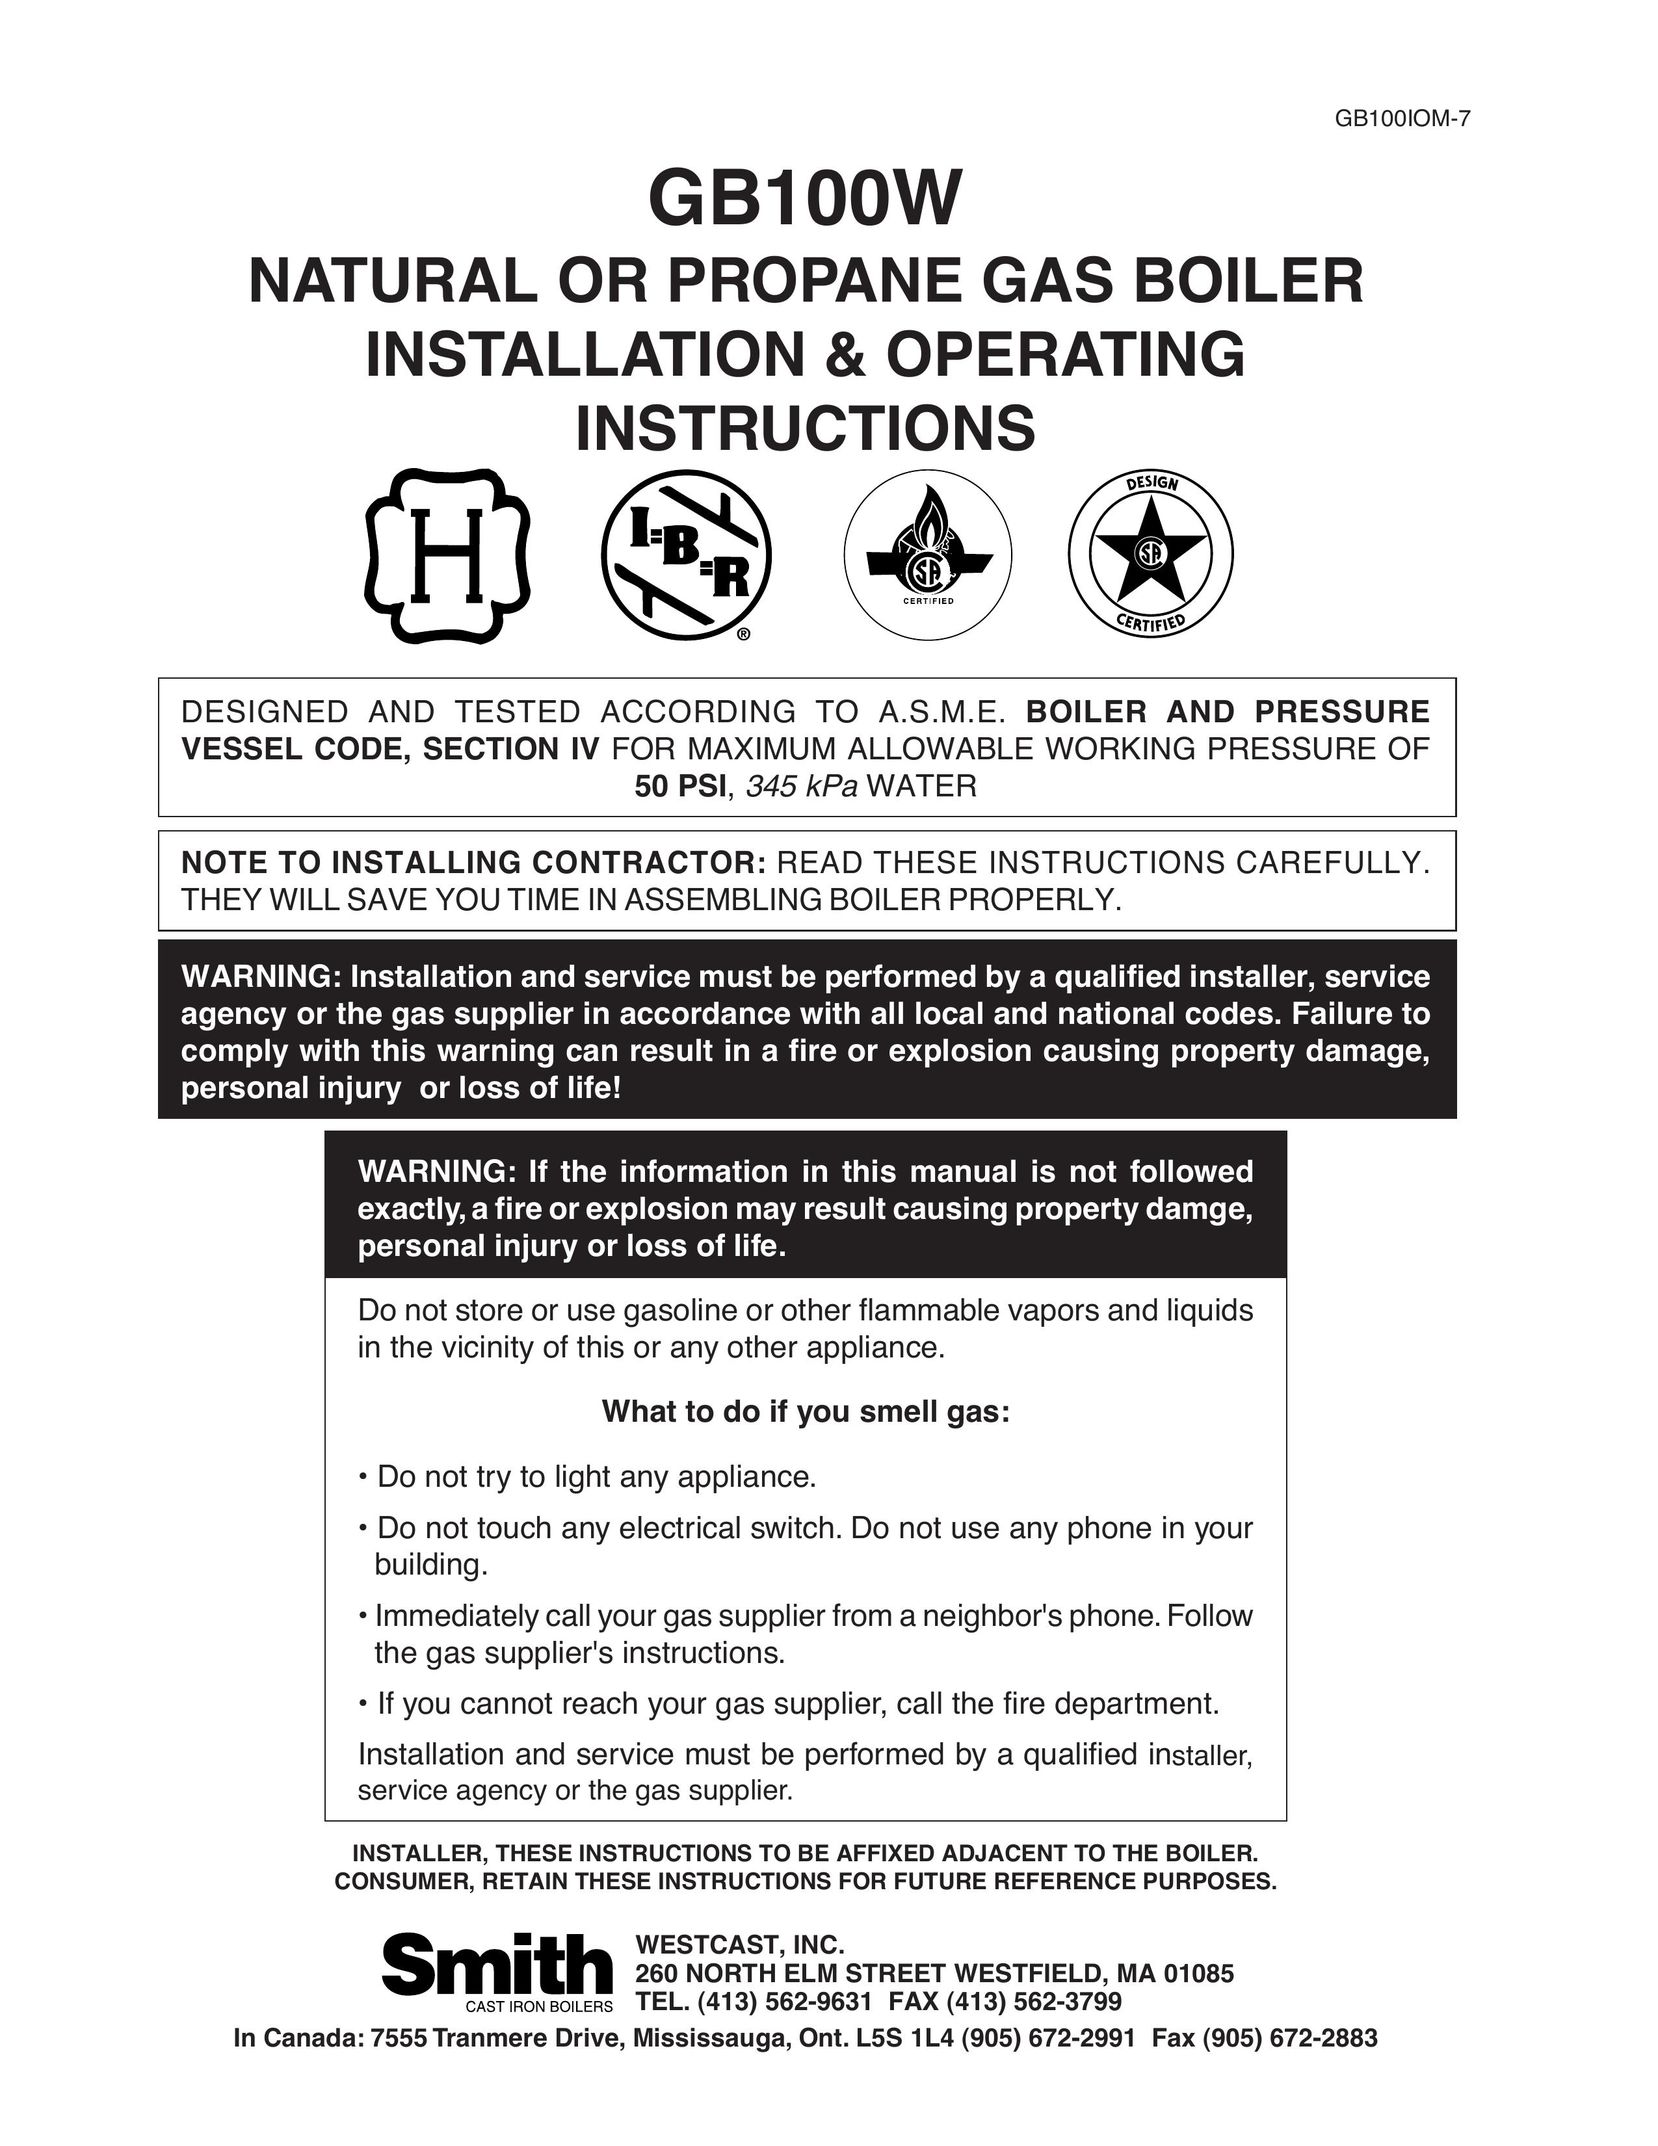 Smith Cast Iron Boilers GB100W Boiler User Manual